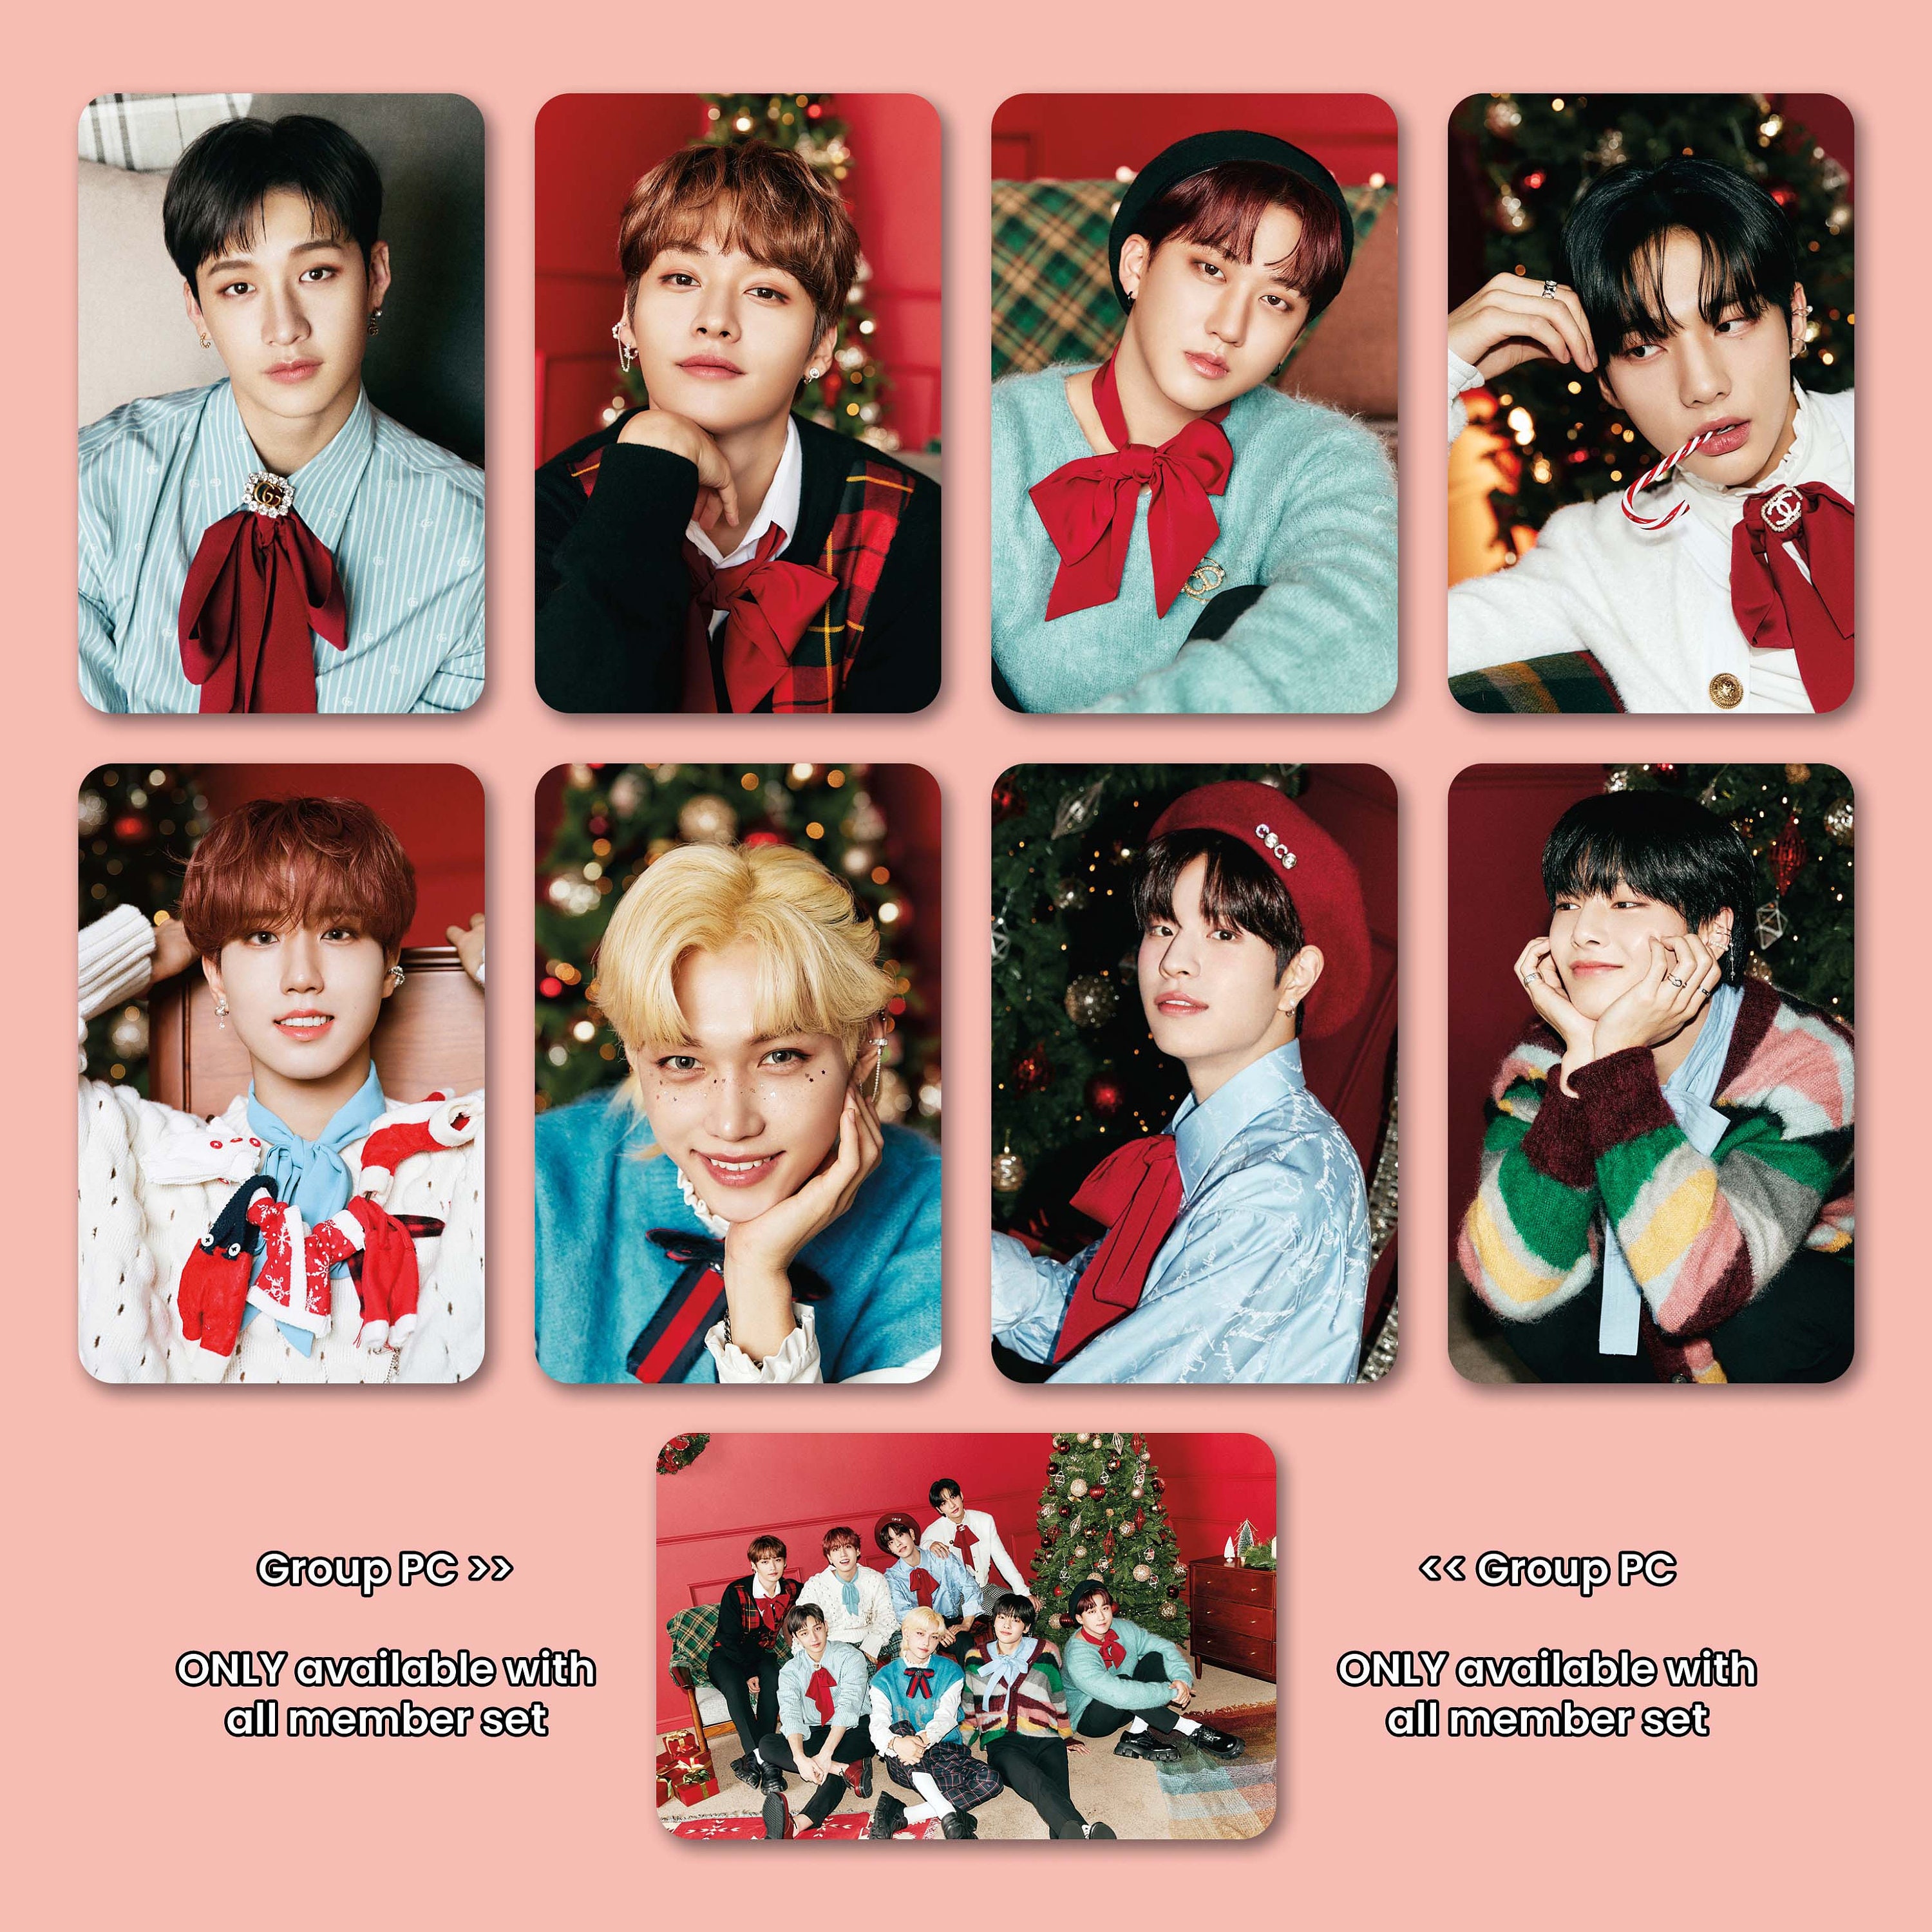 STRAY KIDS OFFICIAL PHOTO CARD - [Christmas evel ] – K Pop Pink